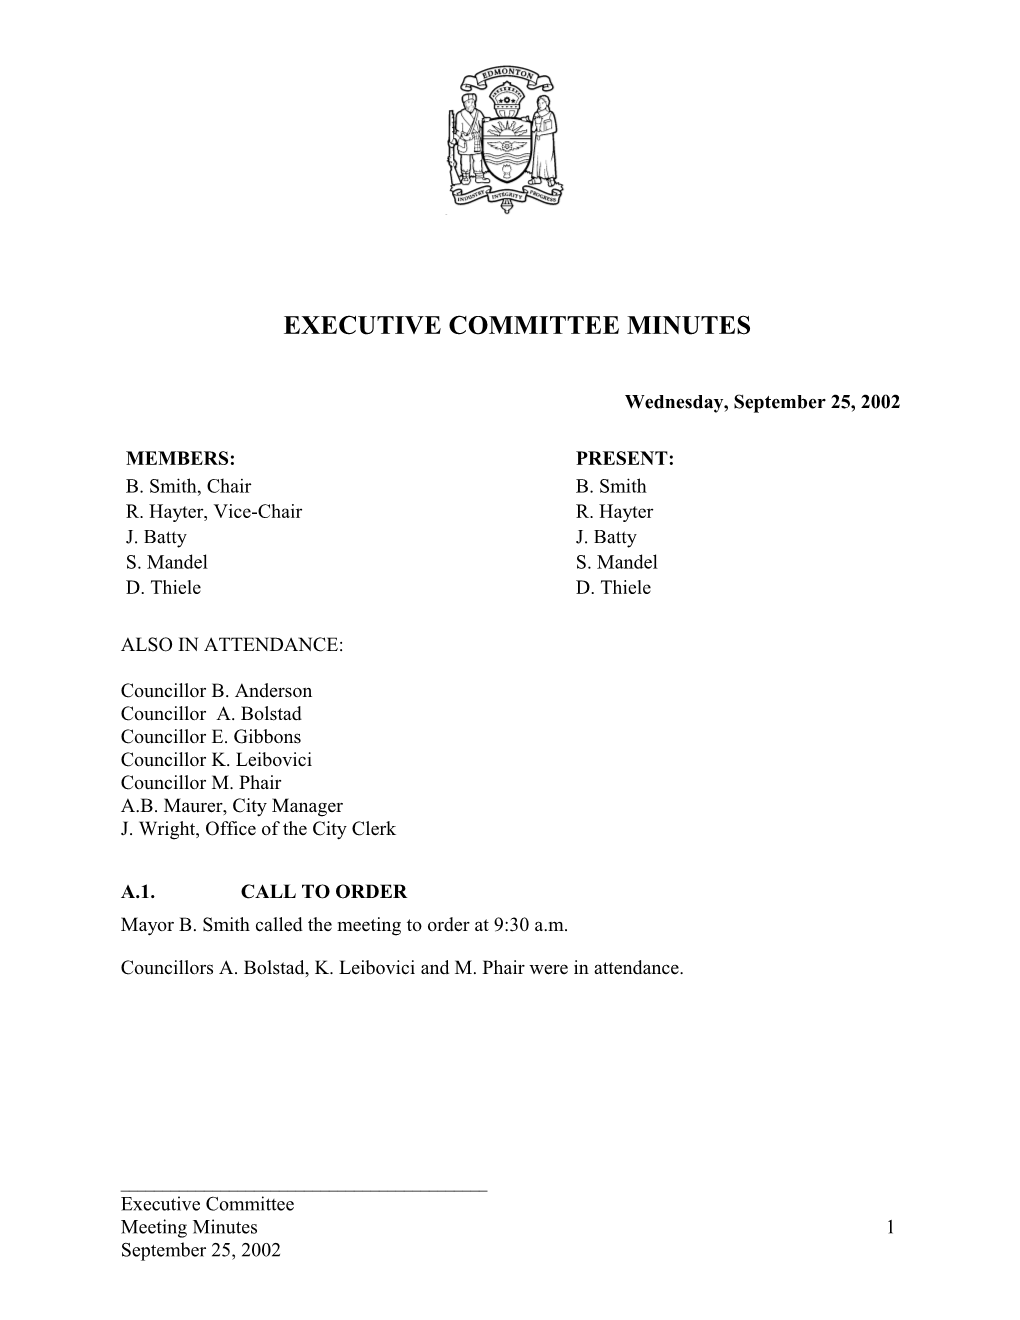 Minutes for Executive Committee September 25, 2002 Meeting